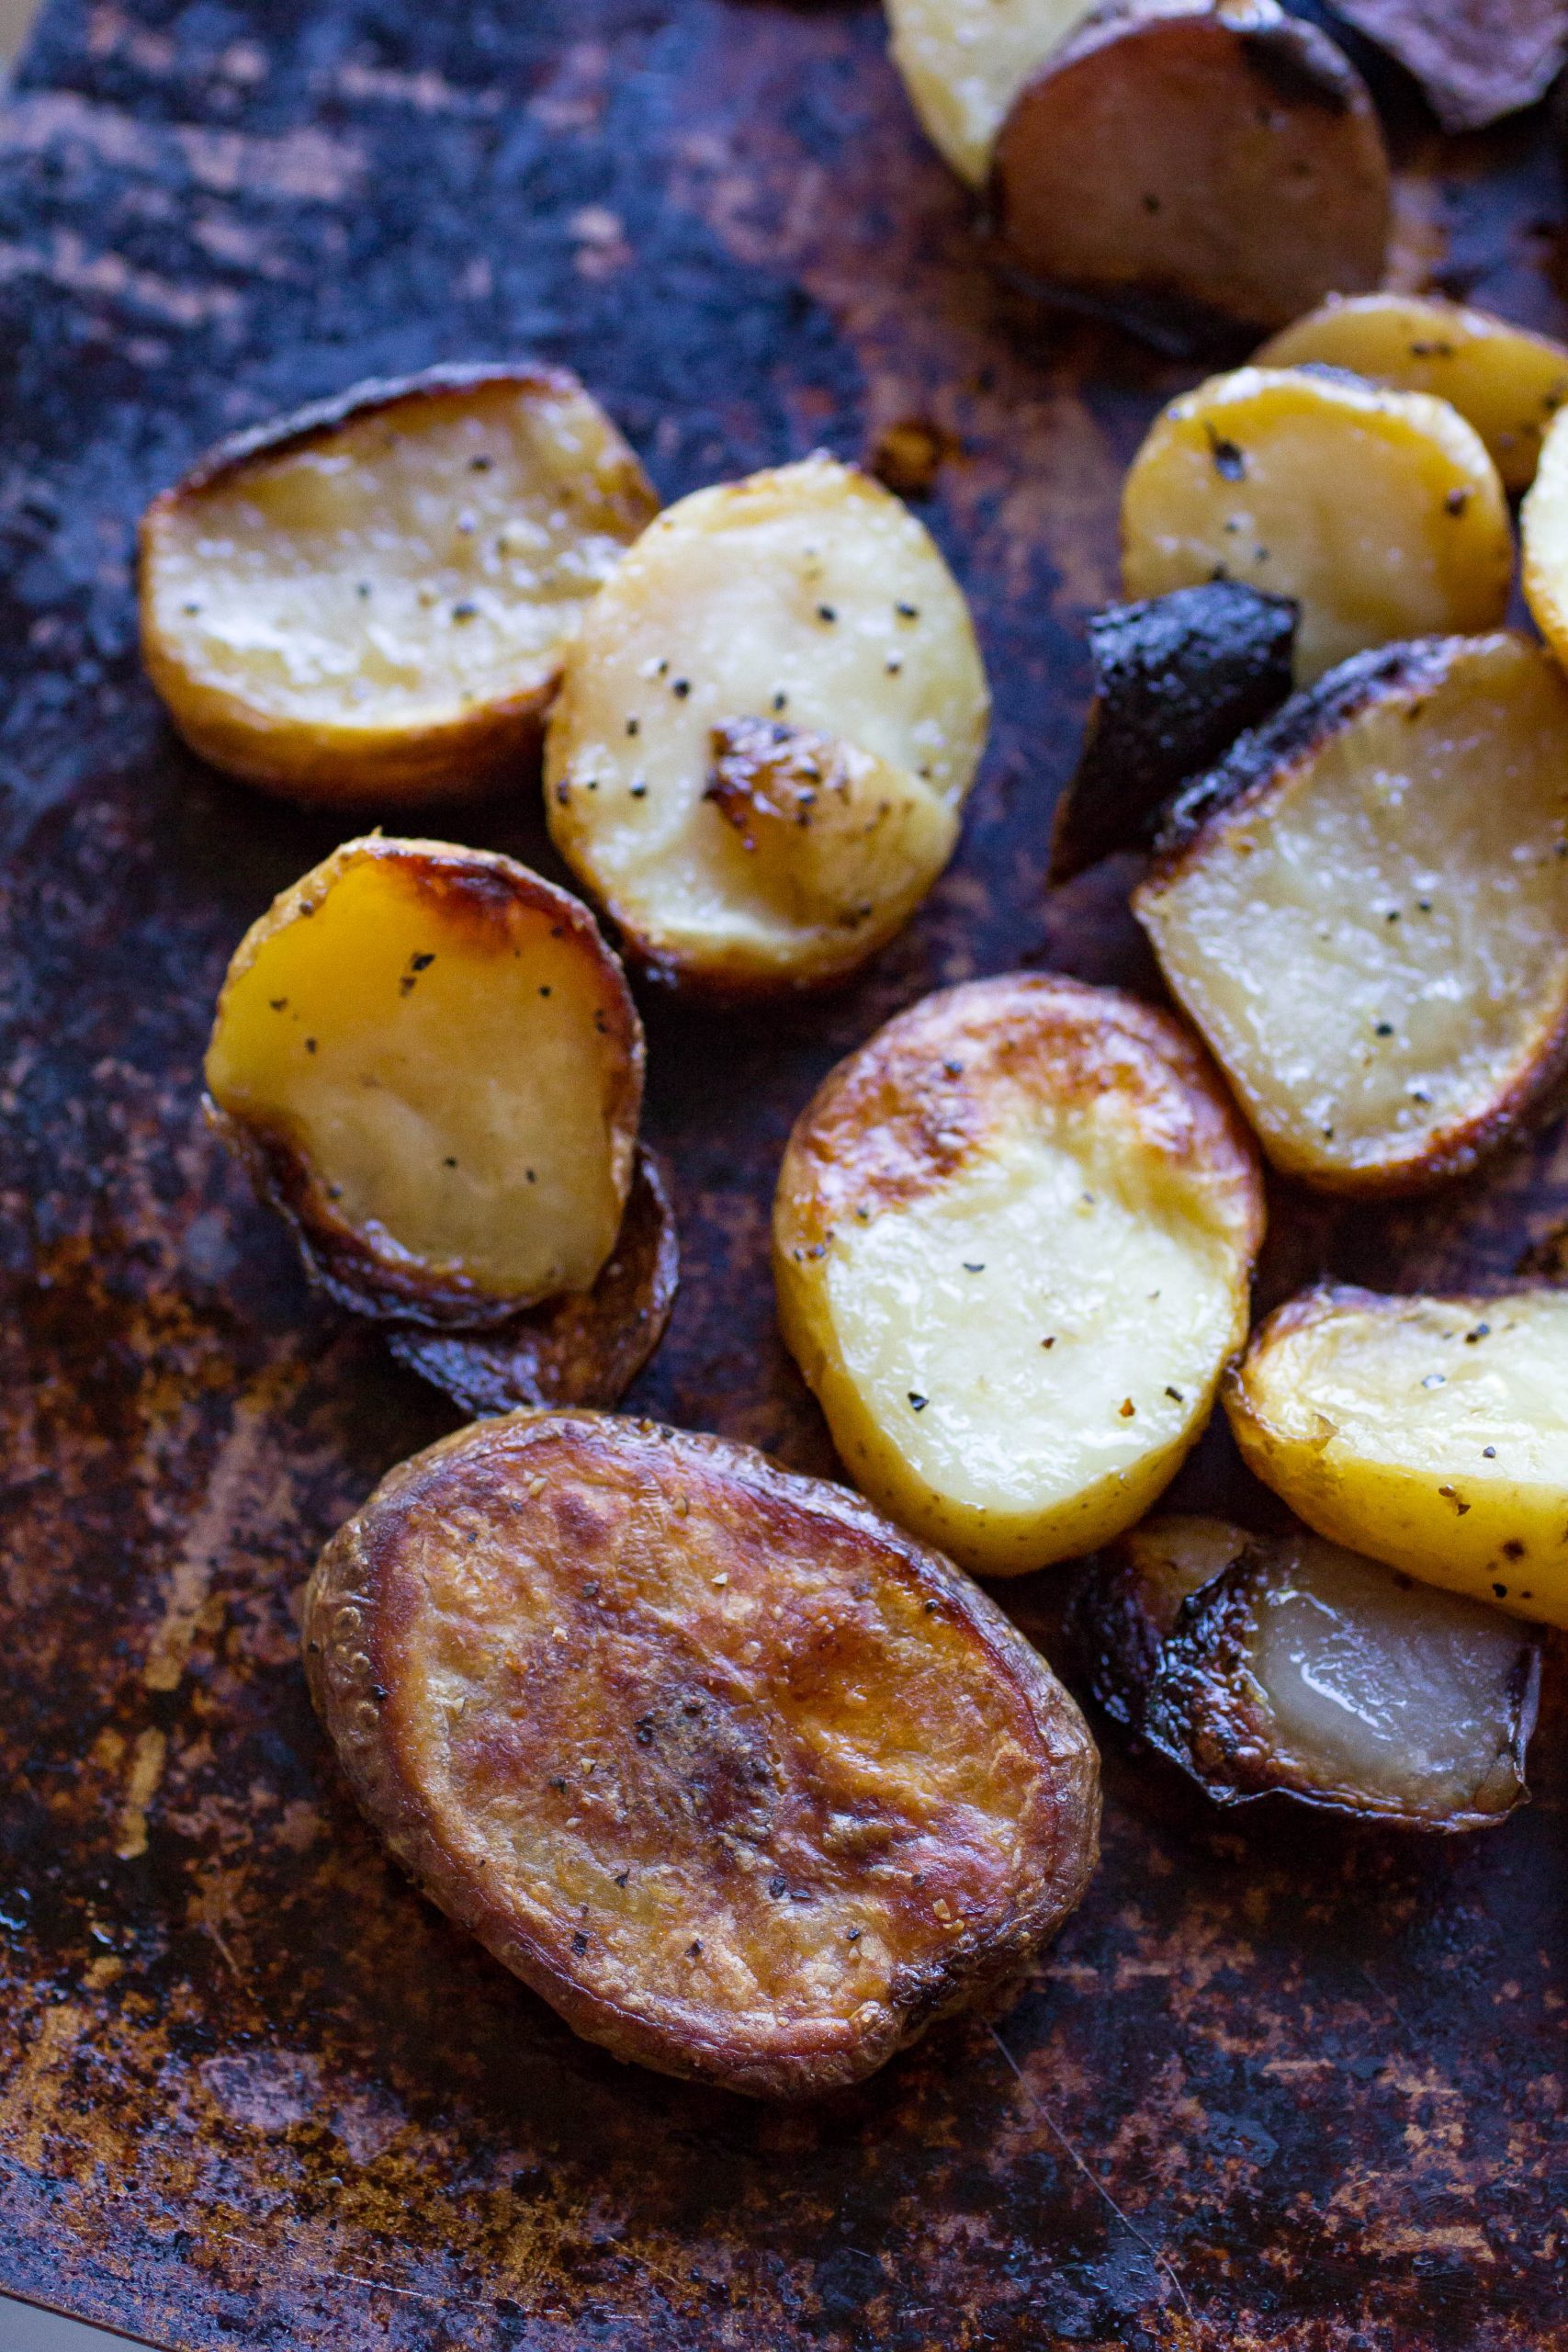 https://www.orwhateveryoudo.com/wp-content/uploads/2020/08/Simple-Grilled-Potatoes-large-2-scaled.jpg